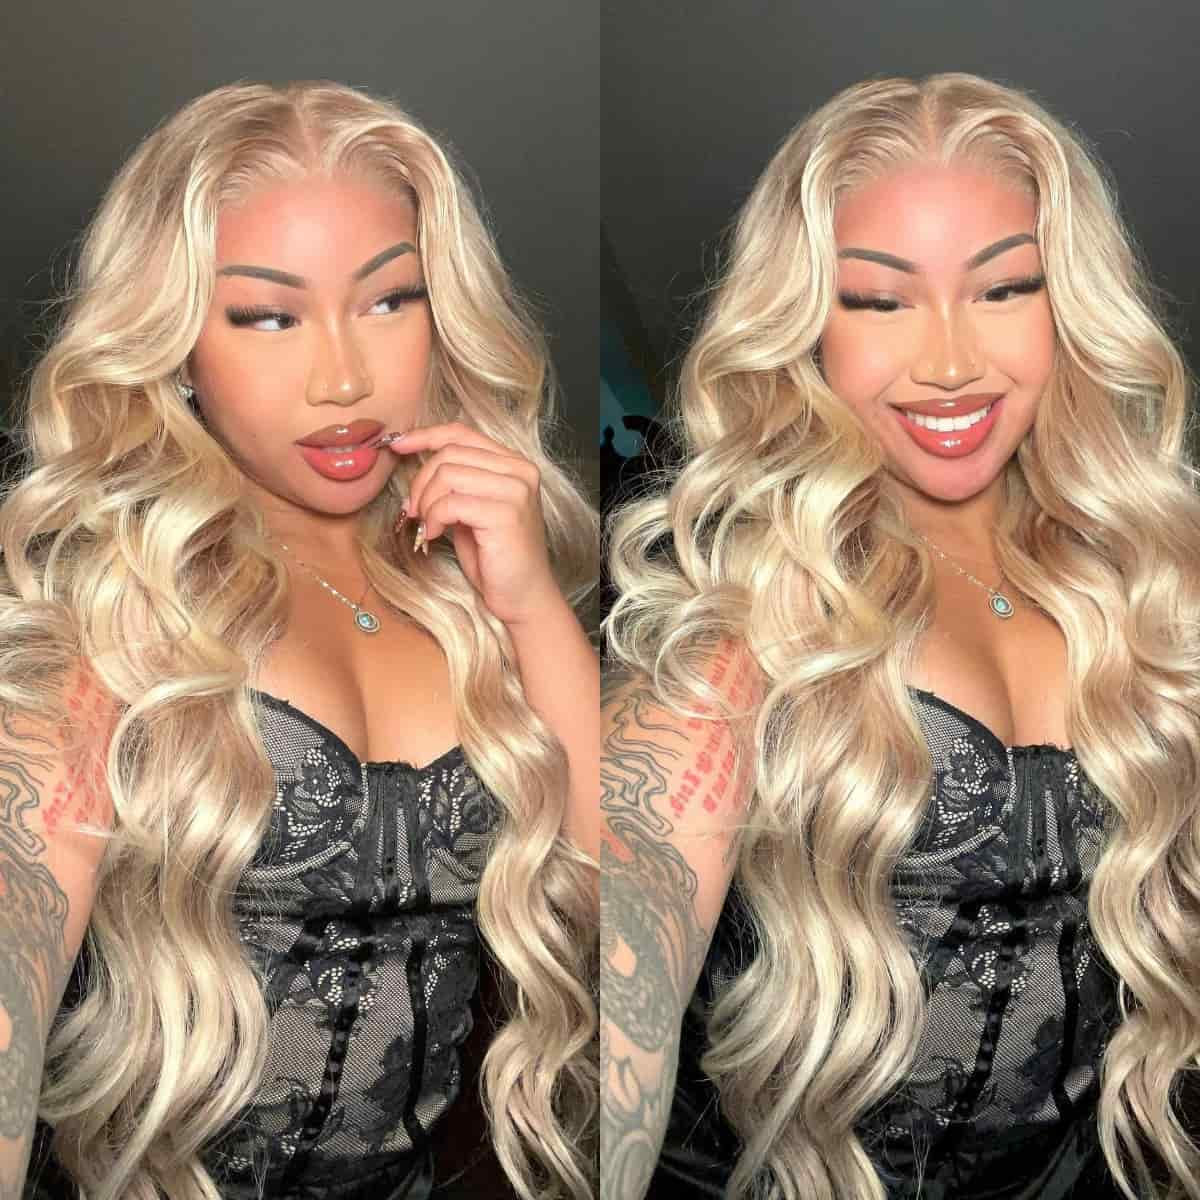 Gluna Hair Exclusive Original Blonde Highlight 10/613 Colored Lace Front Human Hair Wigs